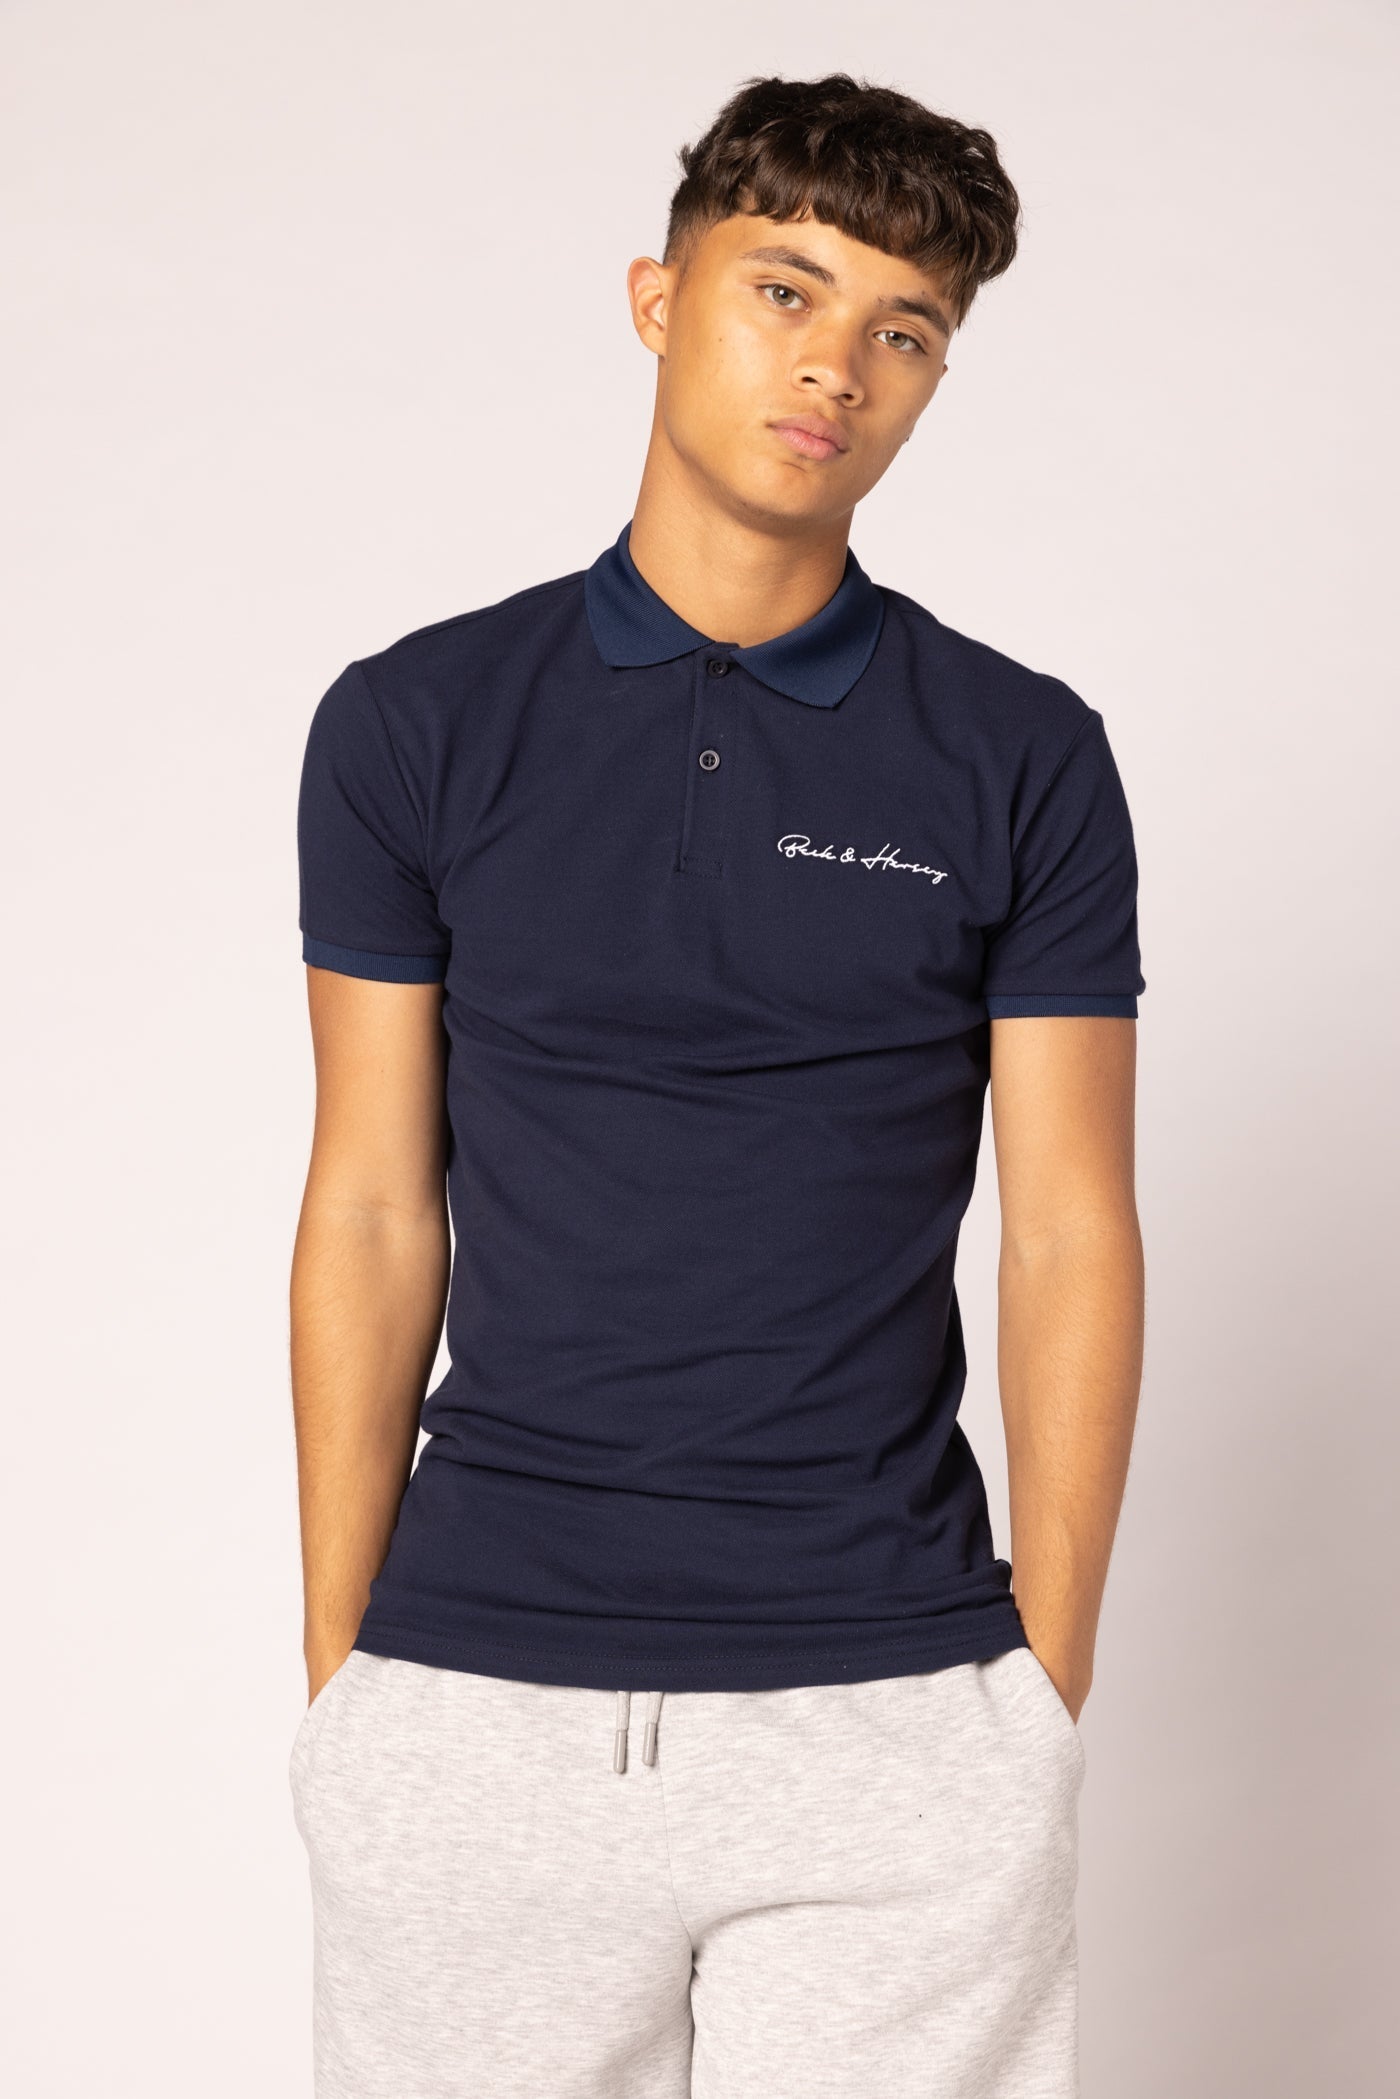 BAROLO Polo Twin Pack - Navy/White